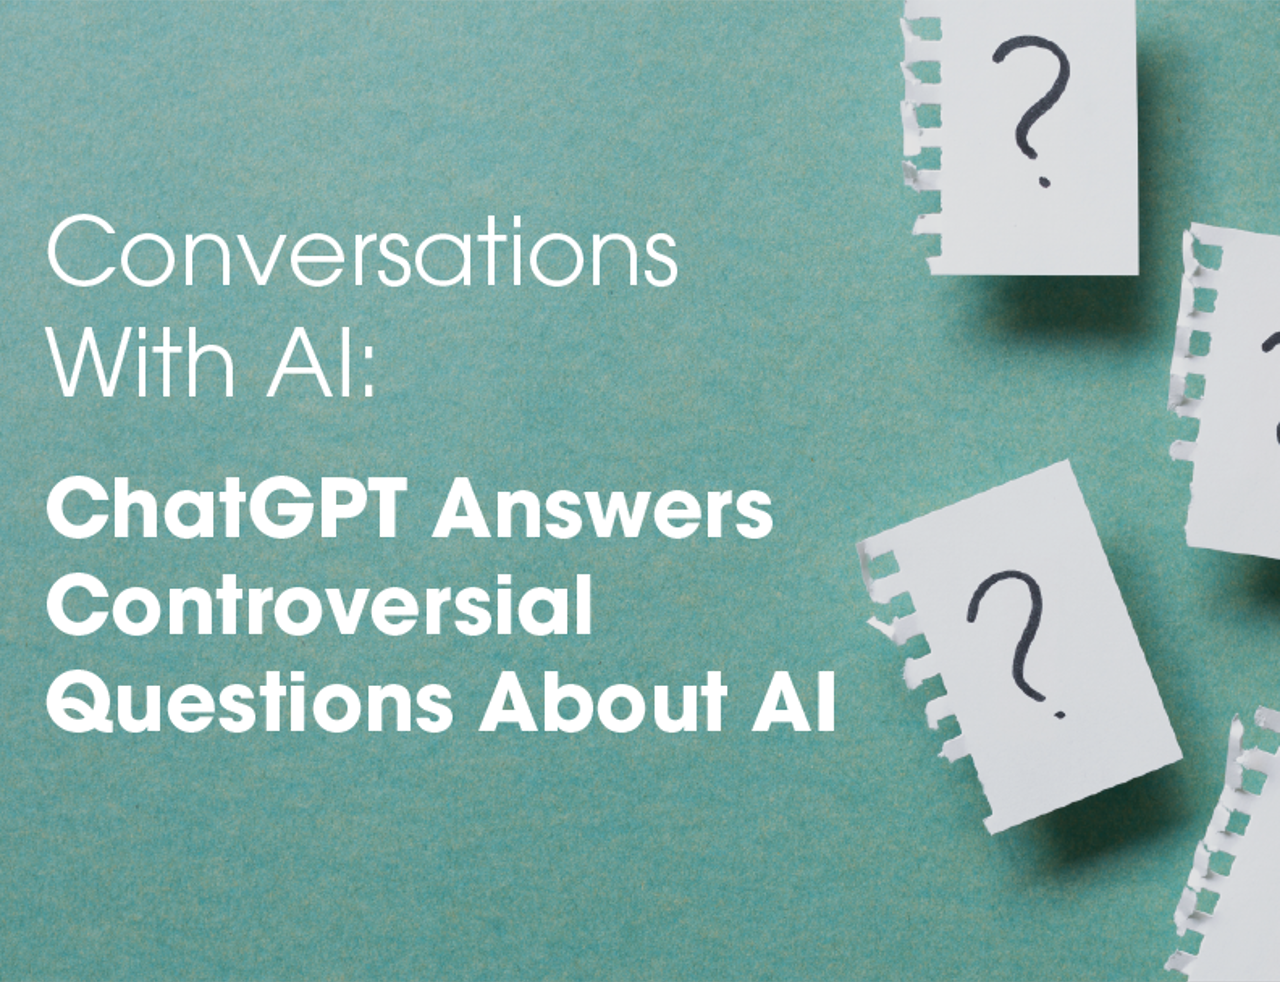 Conversations With AI: ChatGPT Answers Controversial Questions About AI